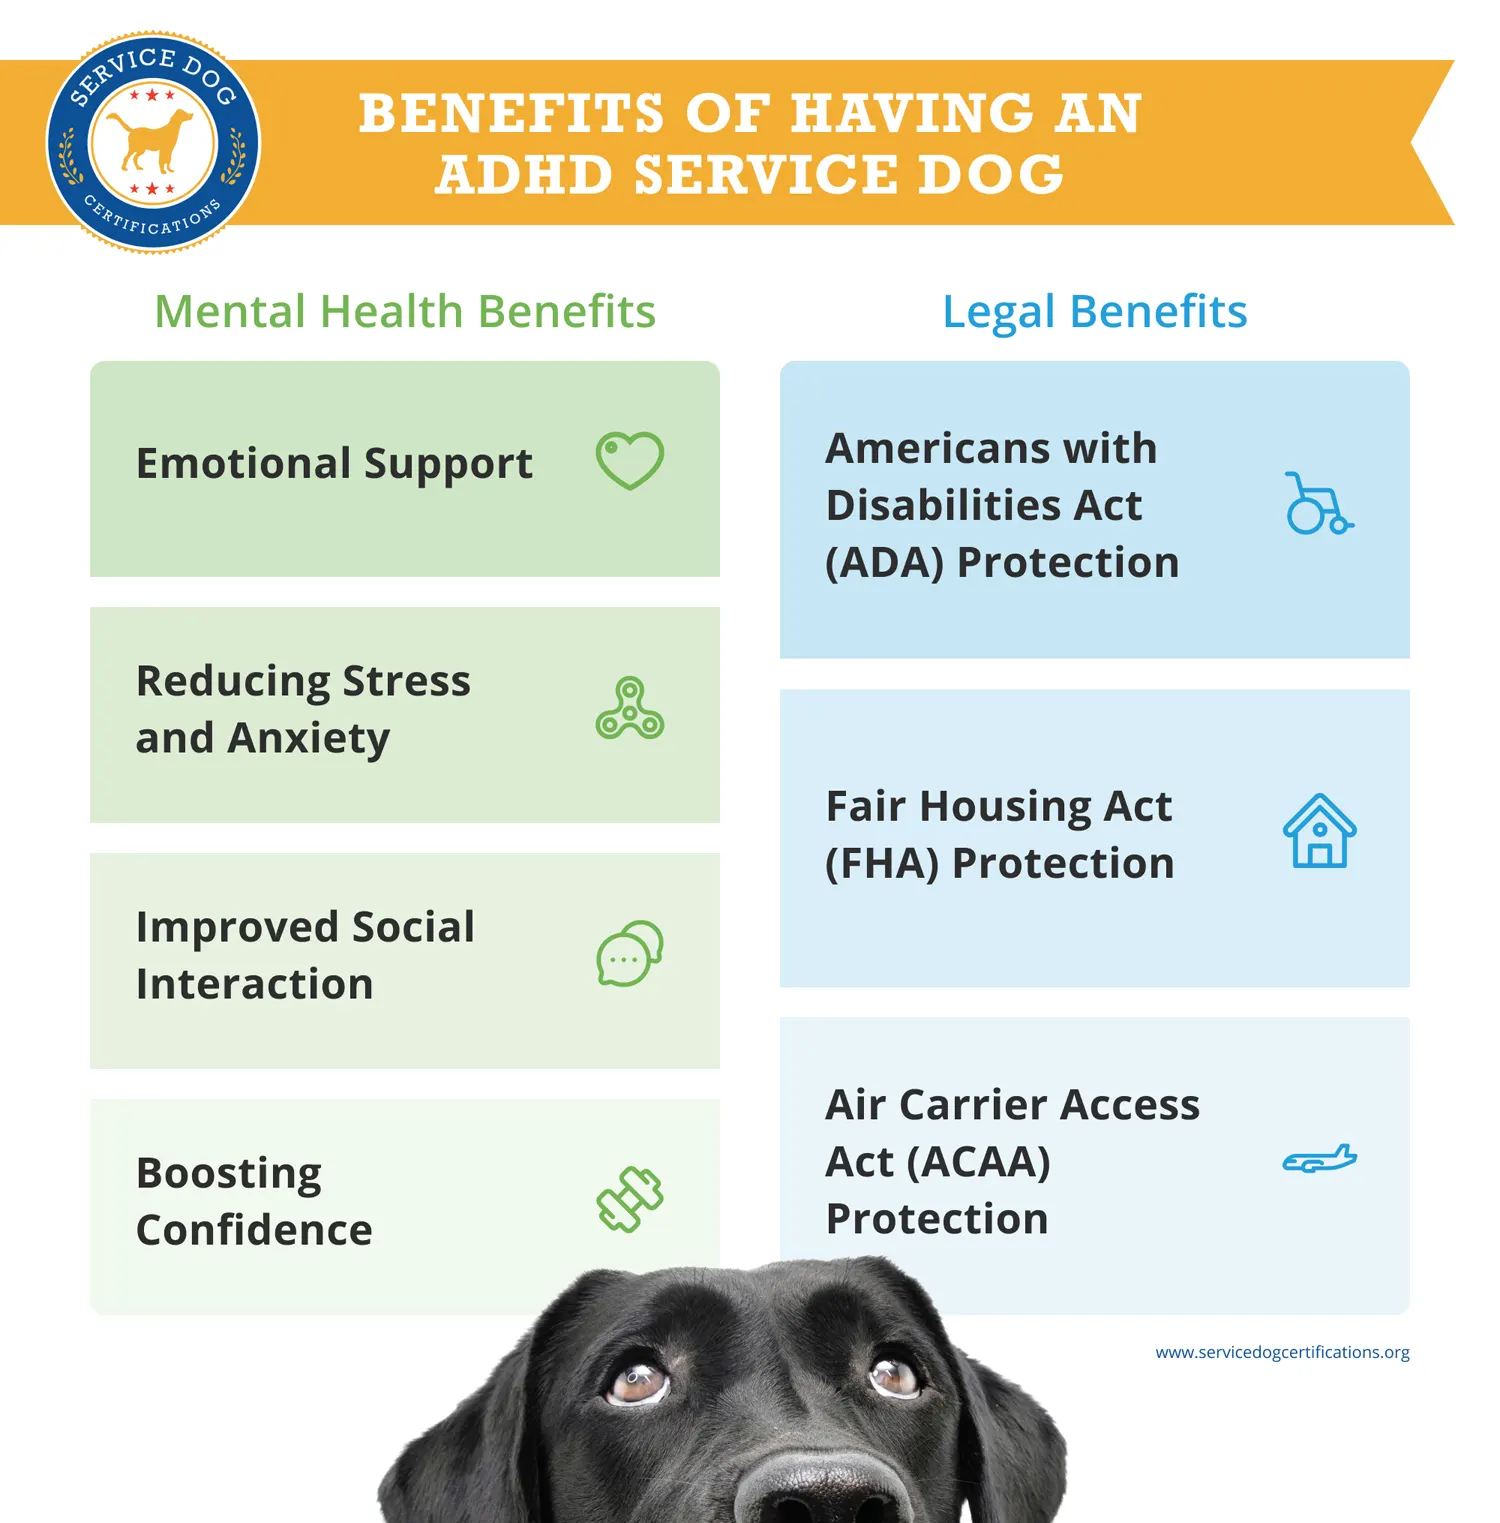 Benefits of Having an ADHD Service Dog - Infographic